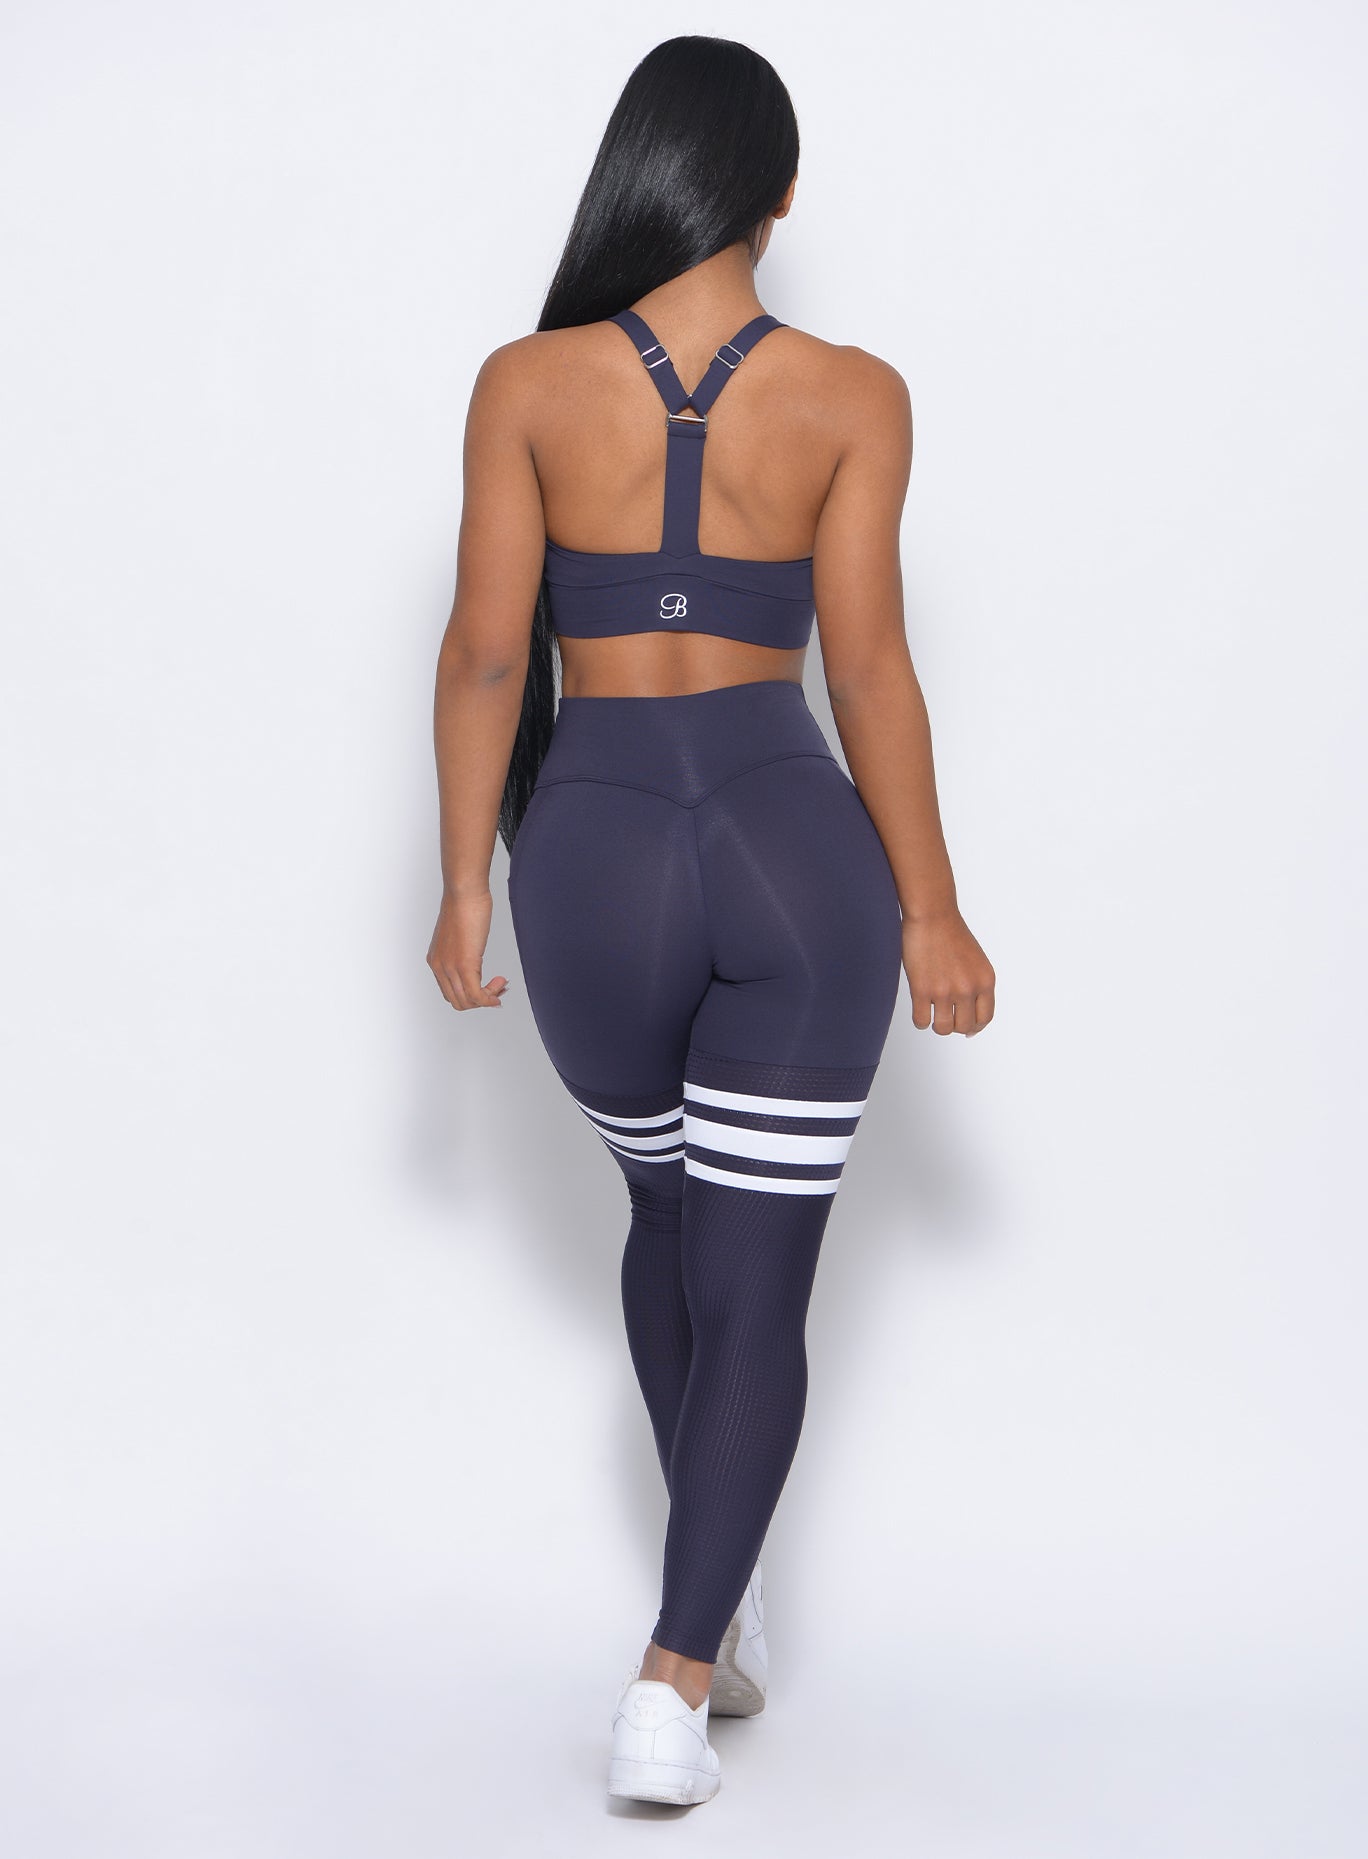 Back profile view of the model wearing our synergy sports bra in twilight blue color and a matching leggings